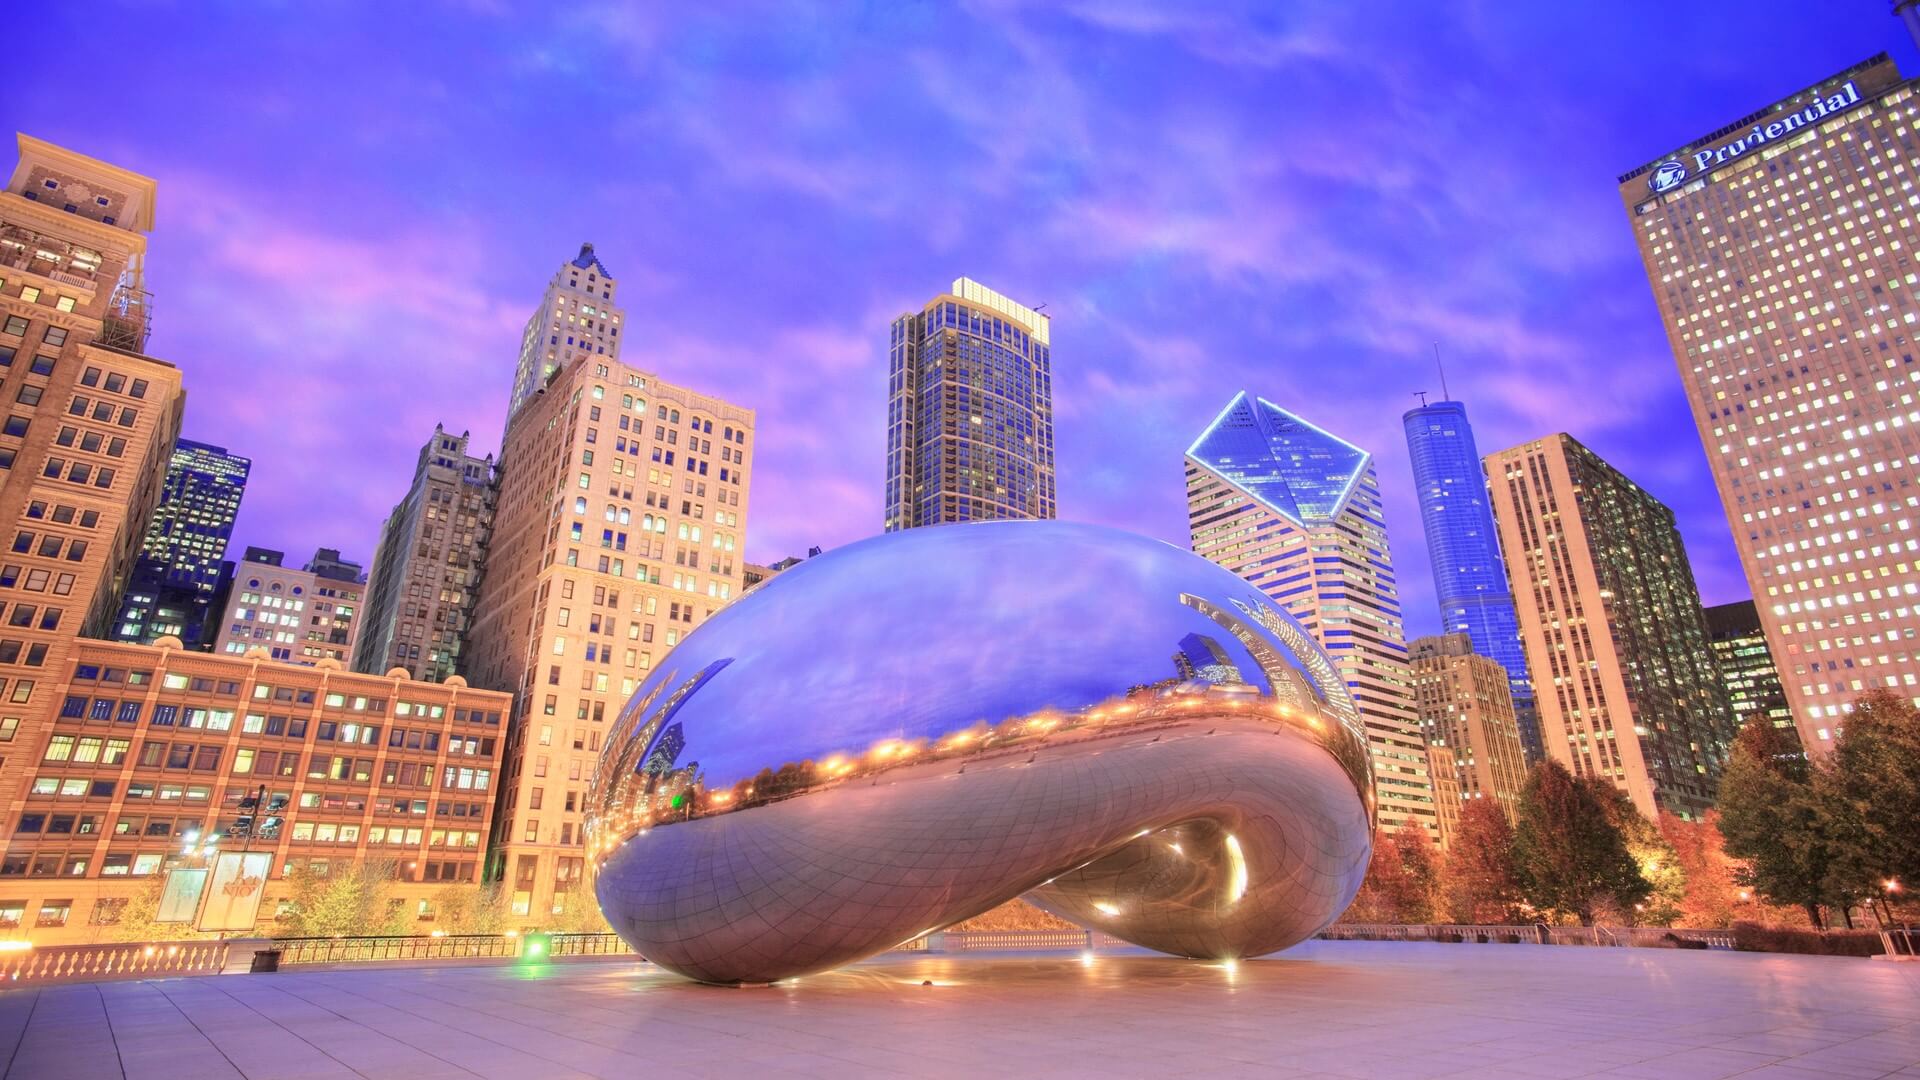 Evening Reflections on Cloud Gate Chicago Illinois Wallpaper